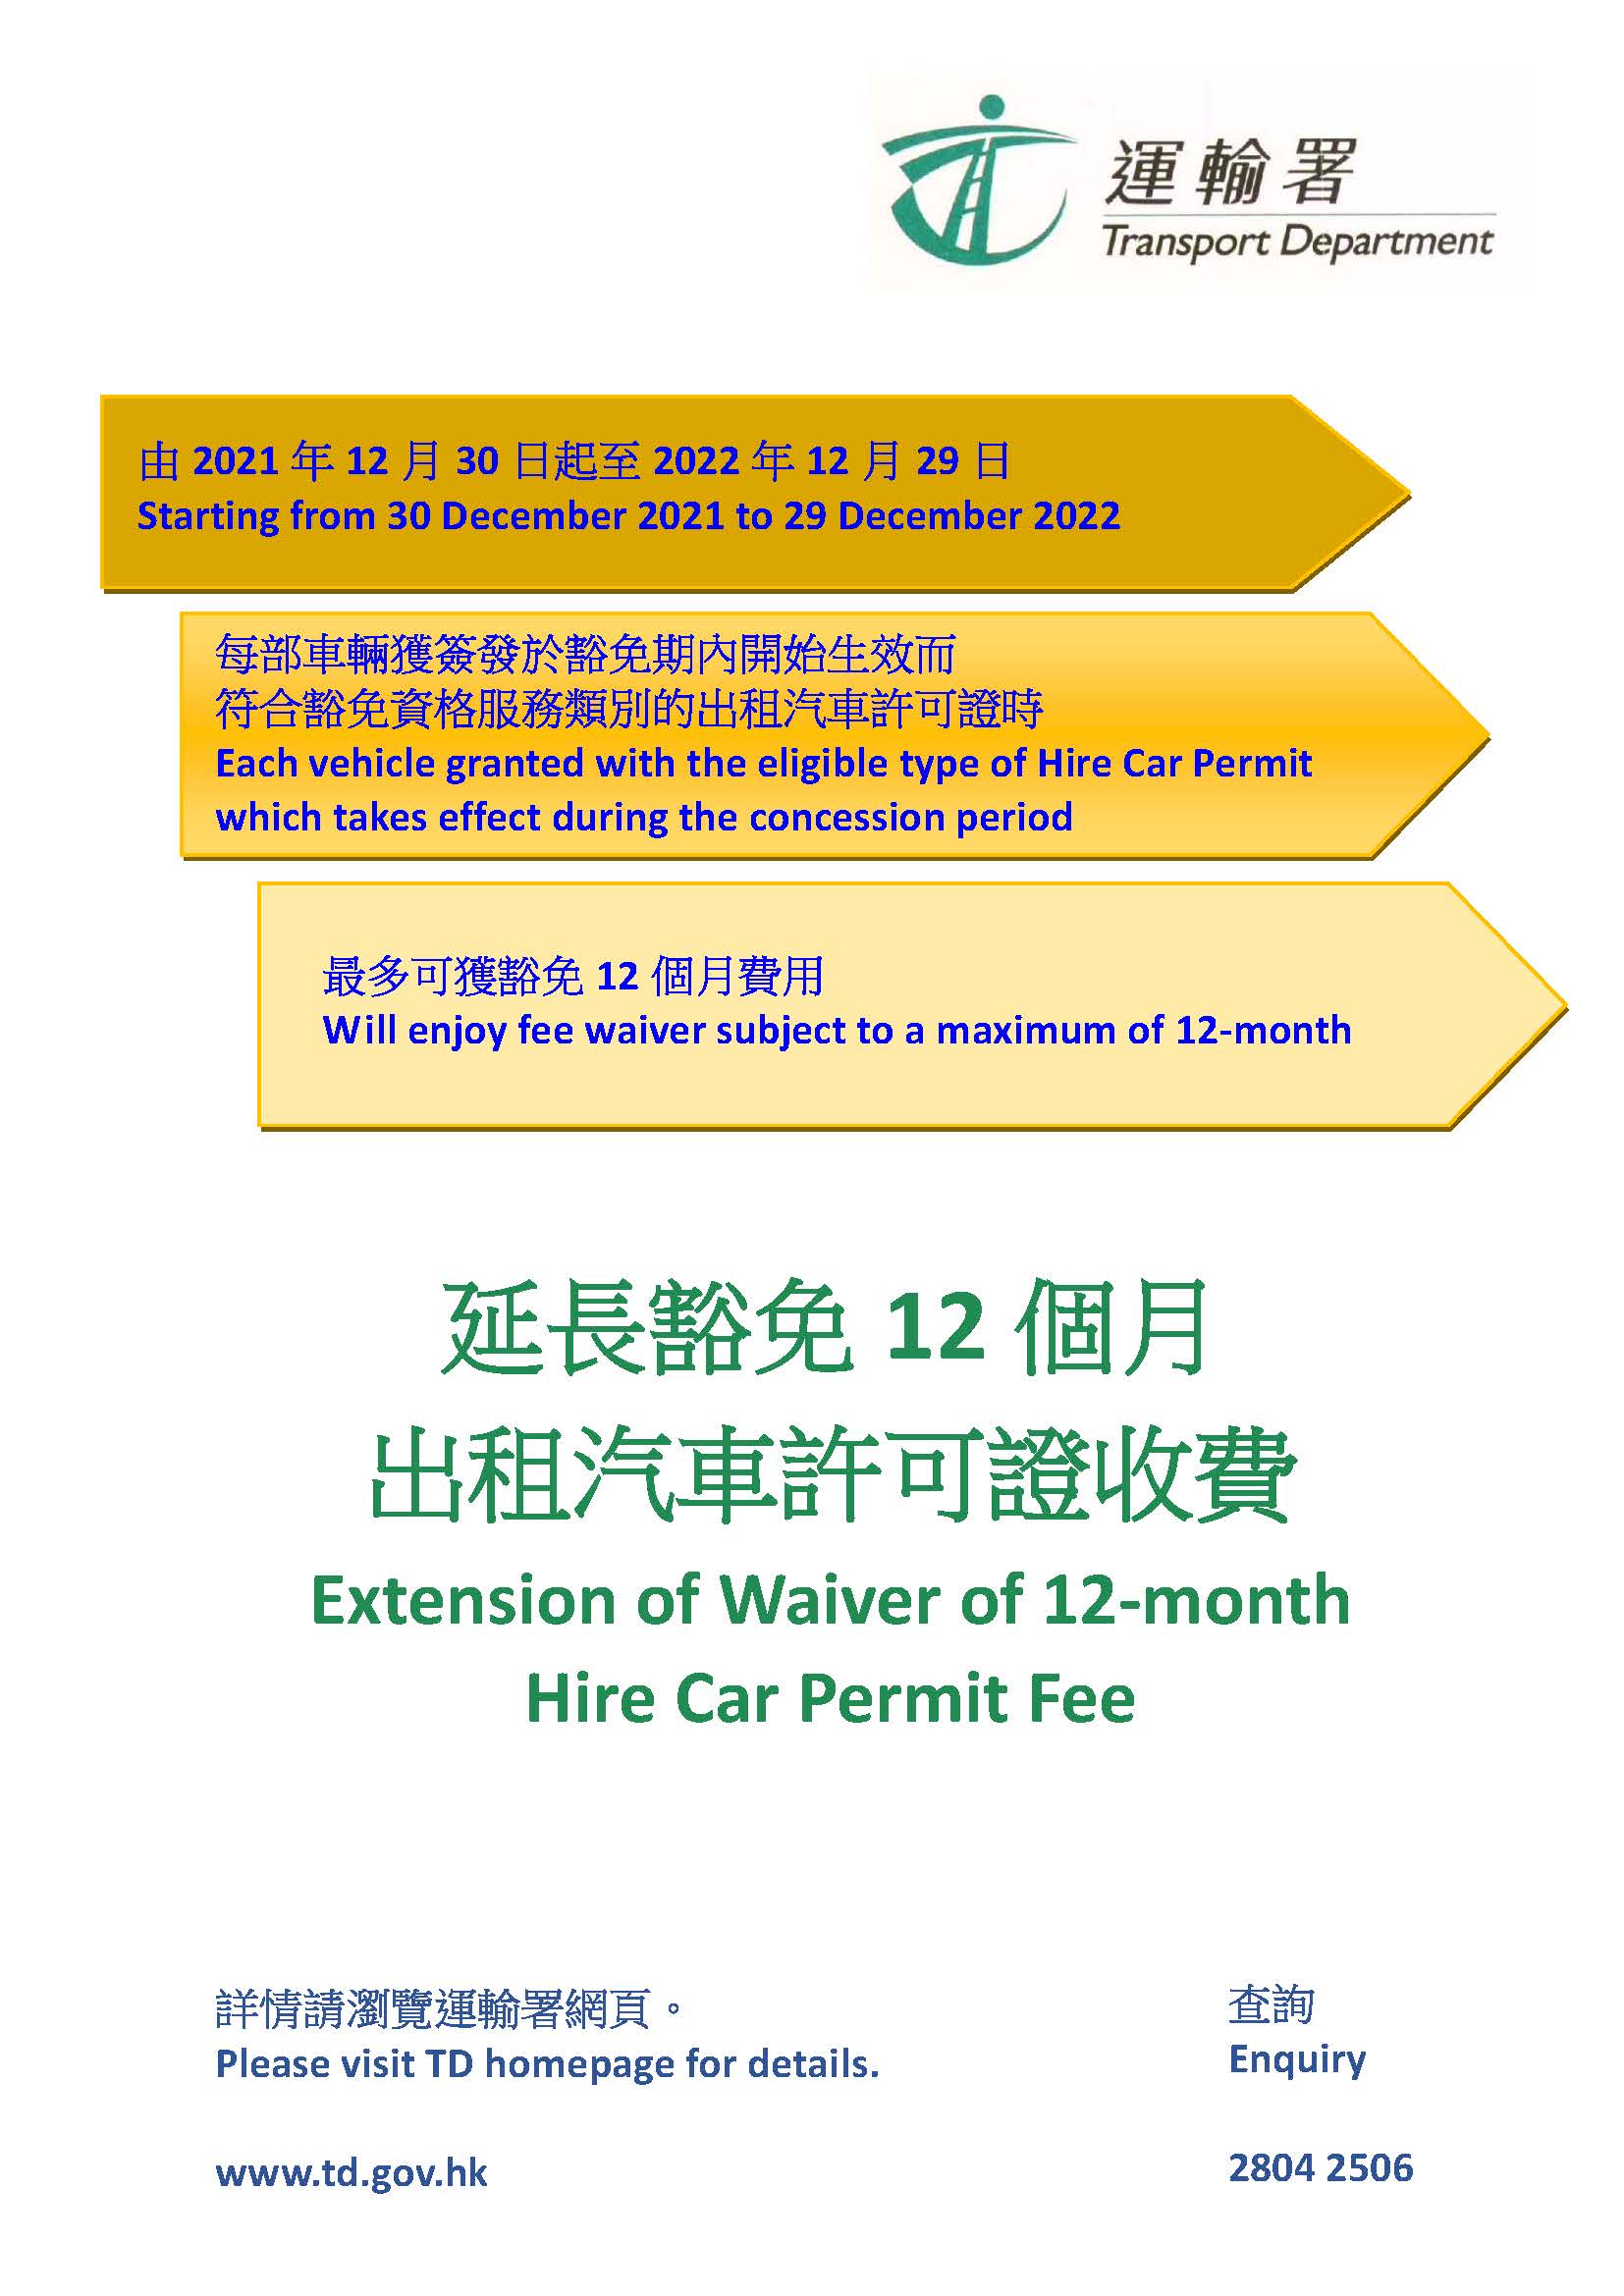 Extension of Waiver of 12-month Hire Car Permit Fee